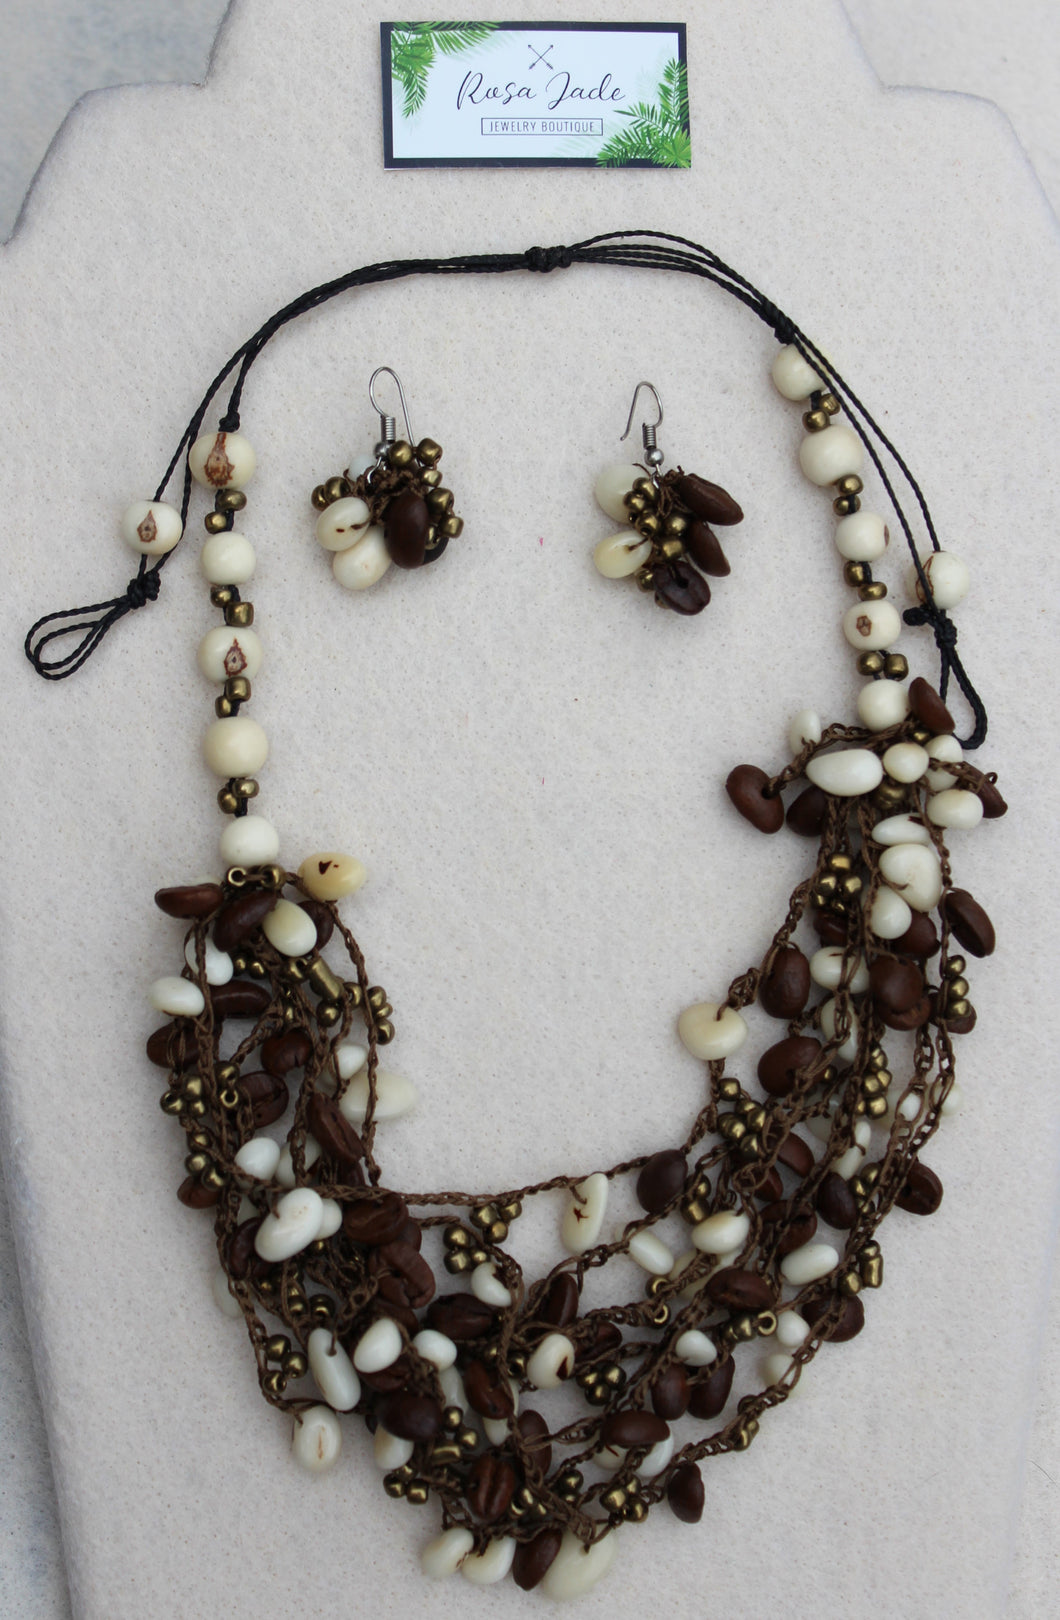 White Tagua Nut and Coffee Beans Necklace and Earrings set